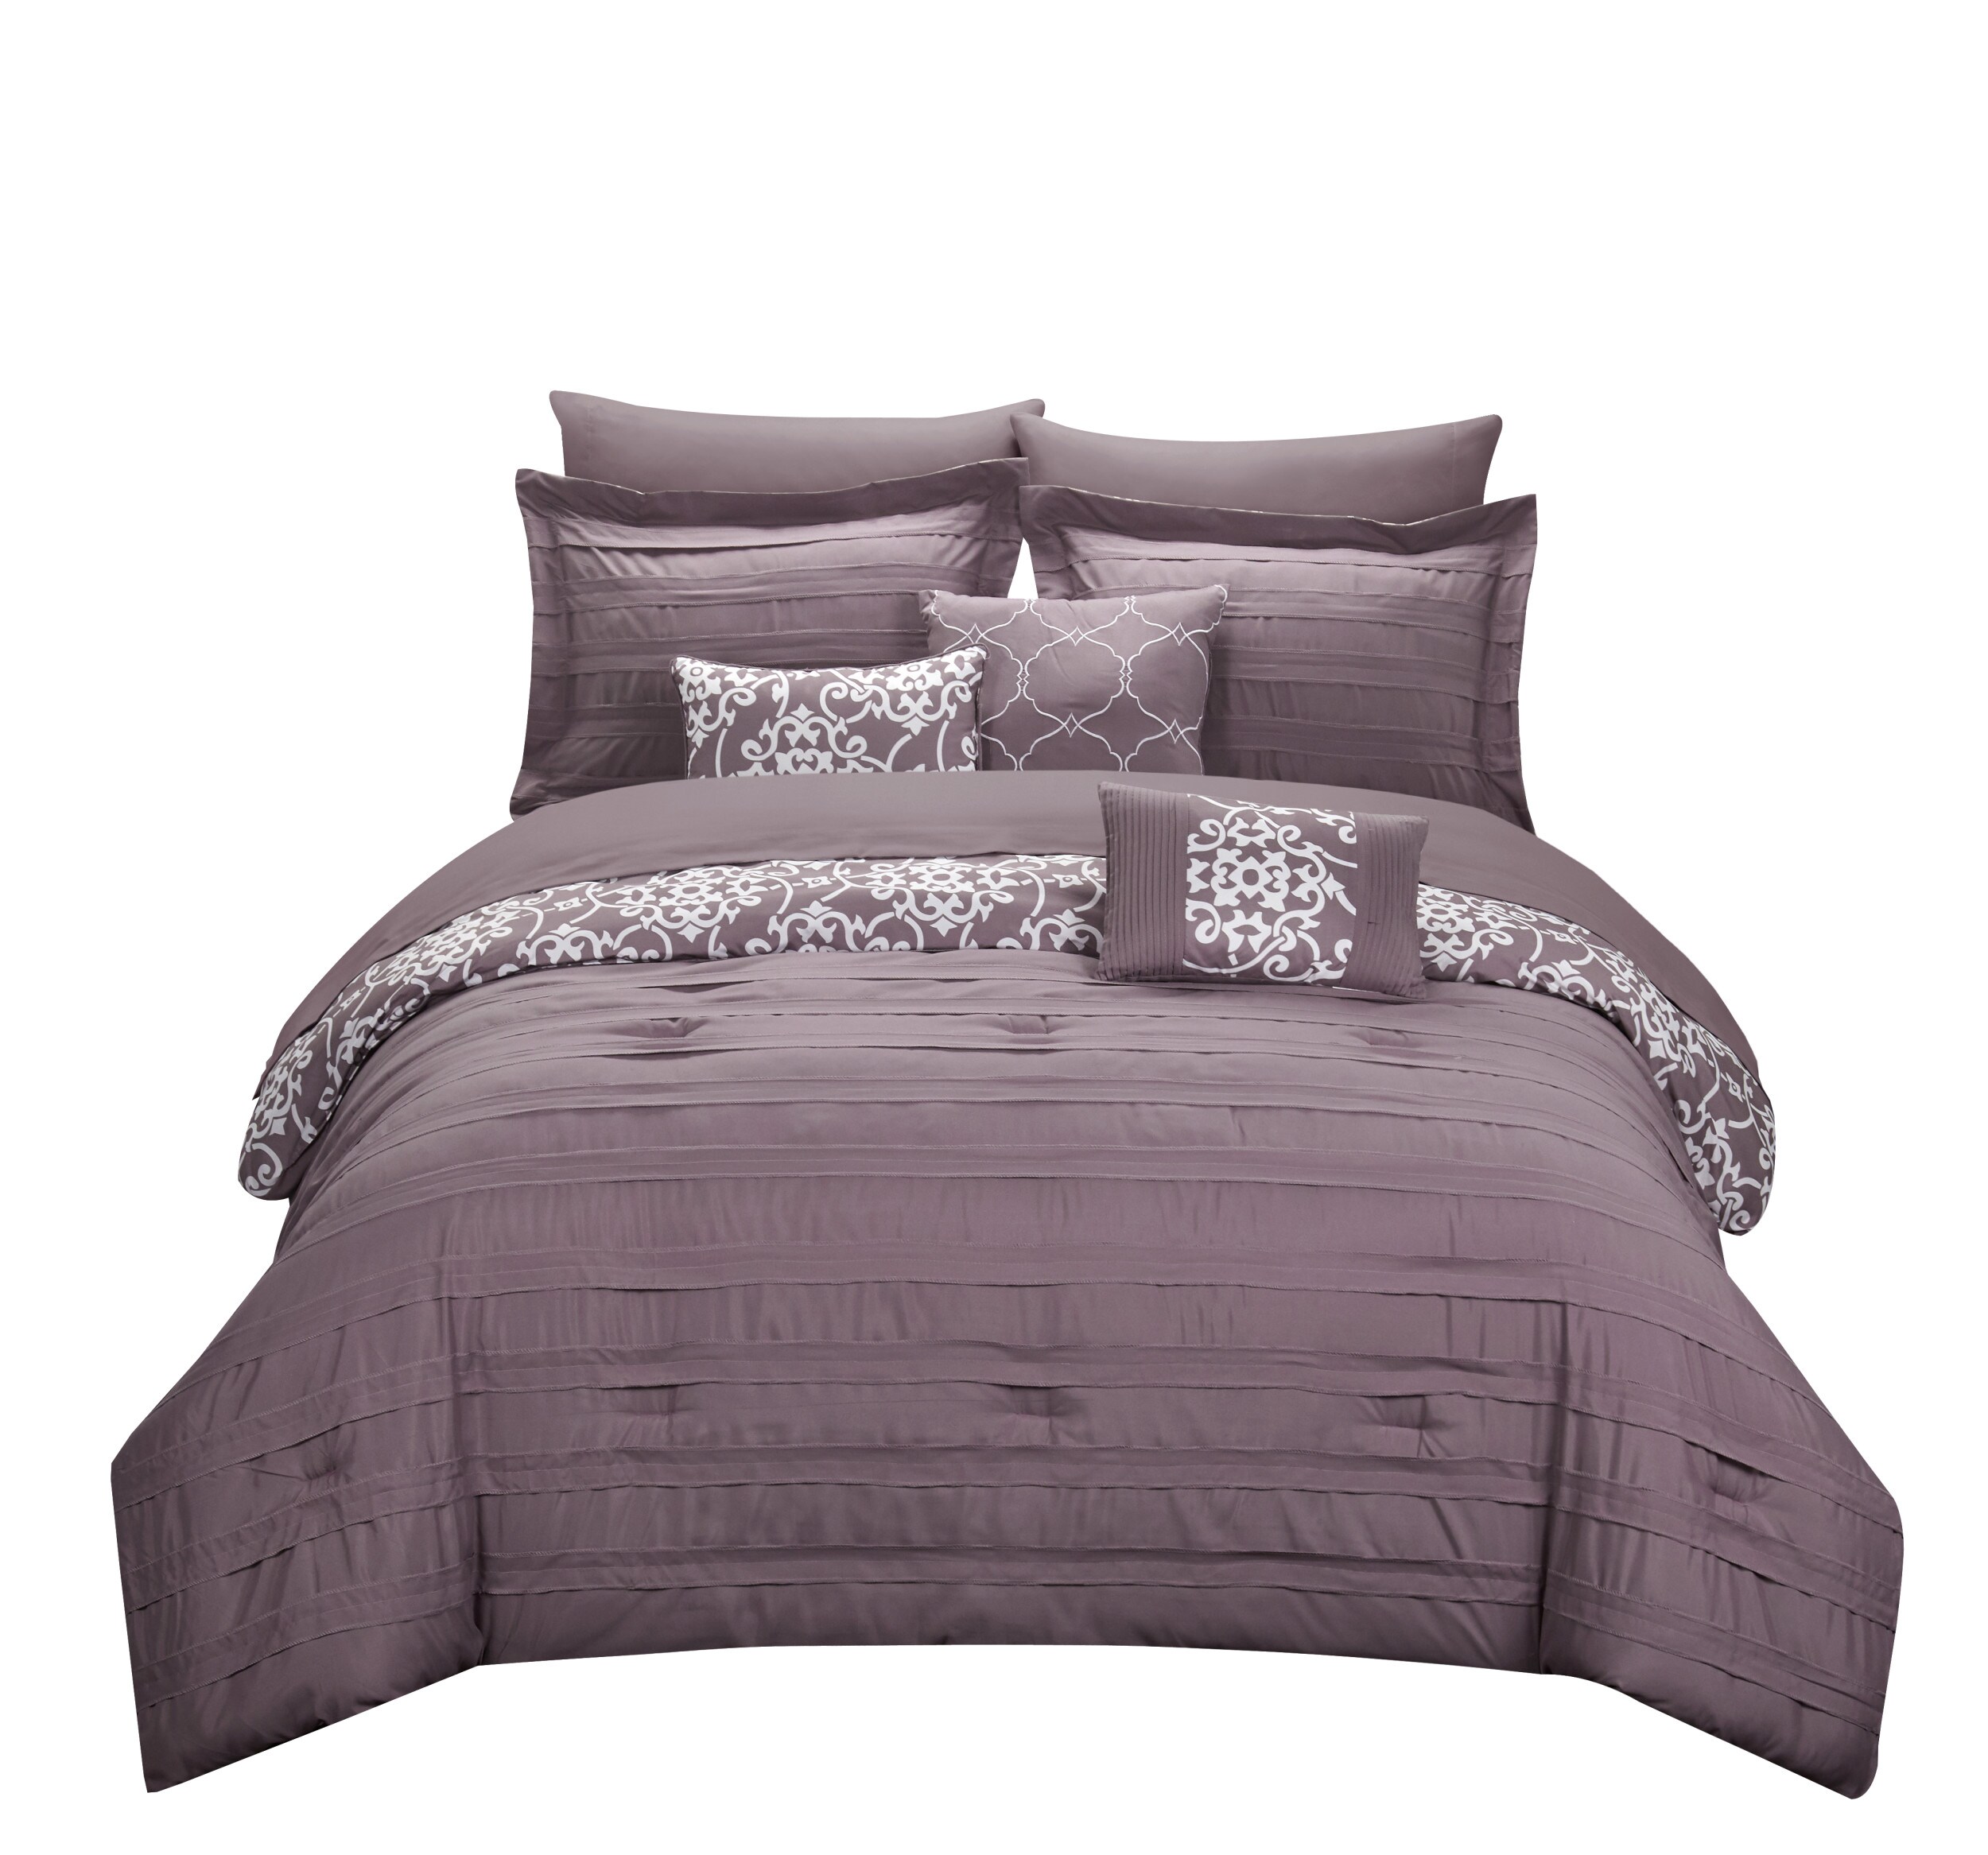 Intelligent Design Stacey Jersey Knit with Ruffles Comforter Set 